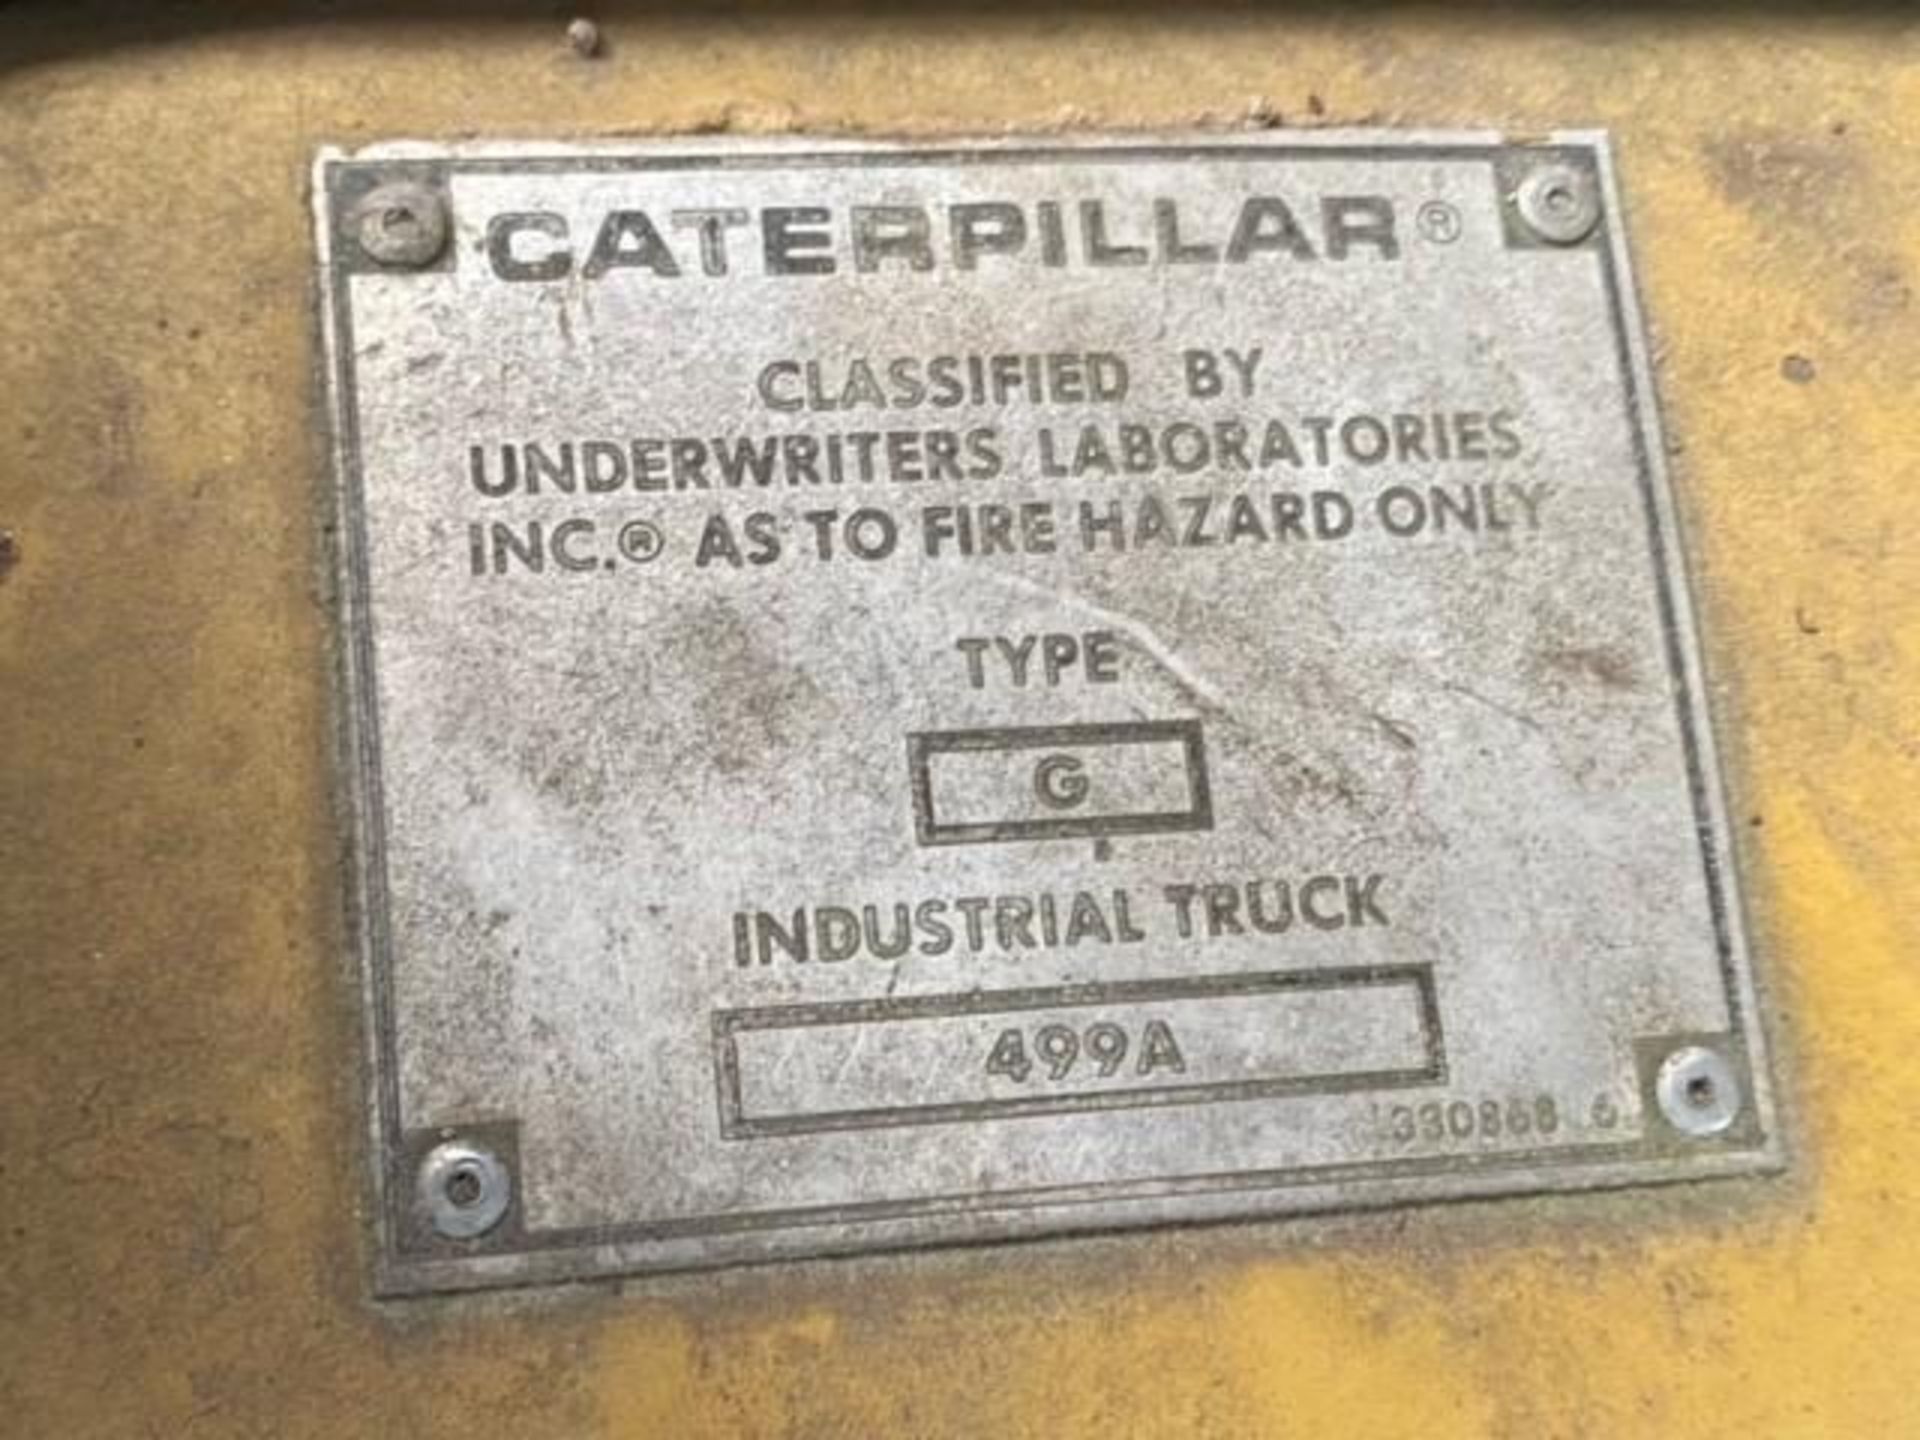 Caterpillar 5000lb Capacity Off Road Forklift - Image 6 of 9